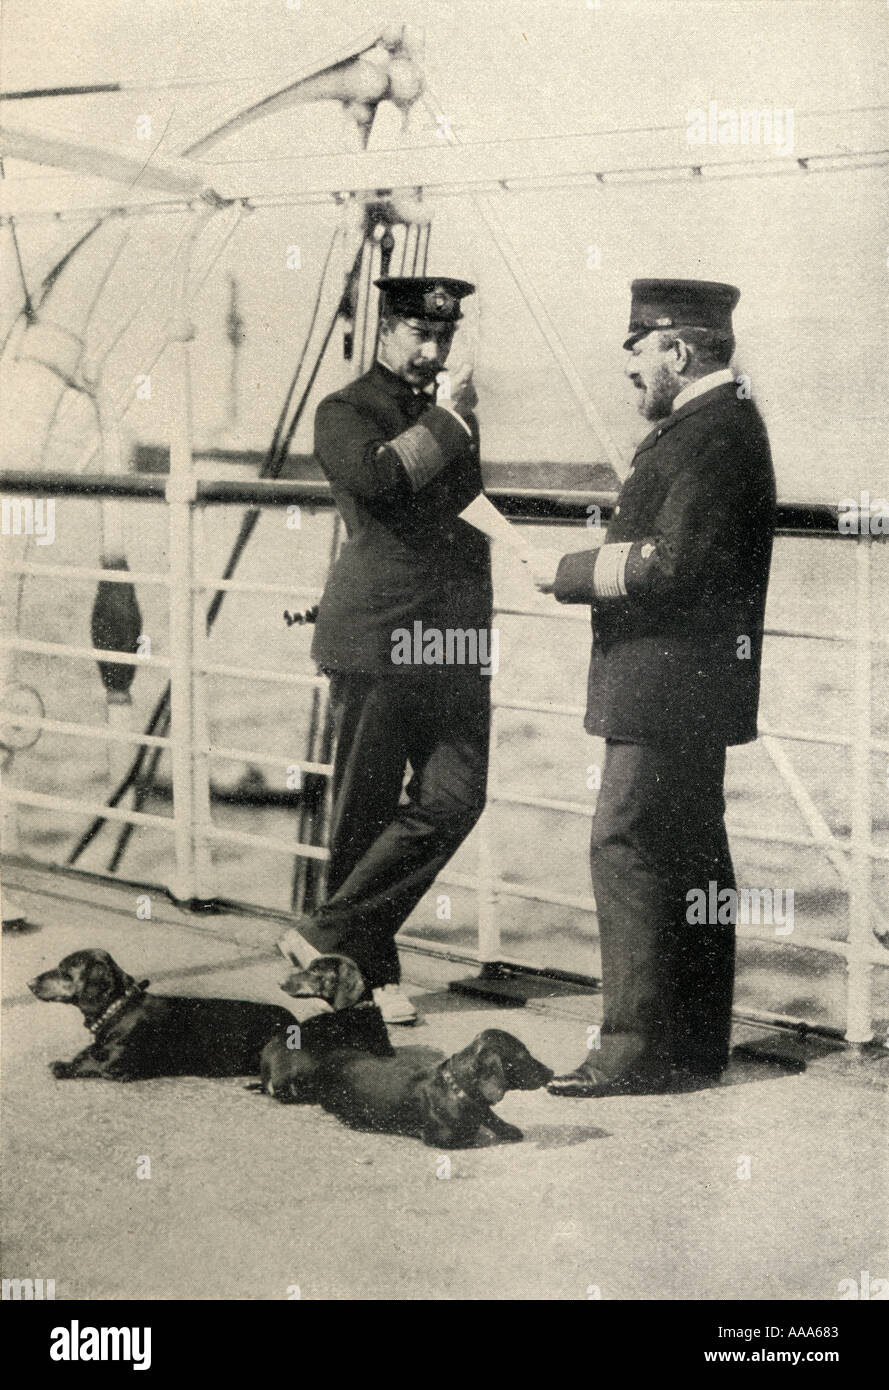 Kaiser Wilhelm II,1859 -1941. Emperor of Germany and King of Prussia, 1888 - 1918, seen here on board ship Stock Photo